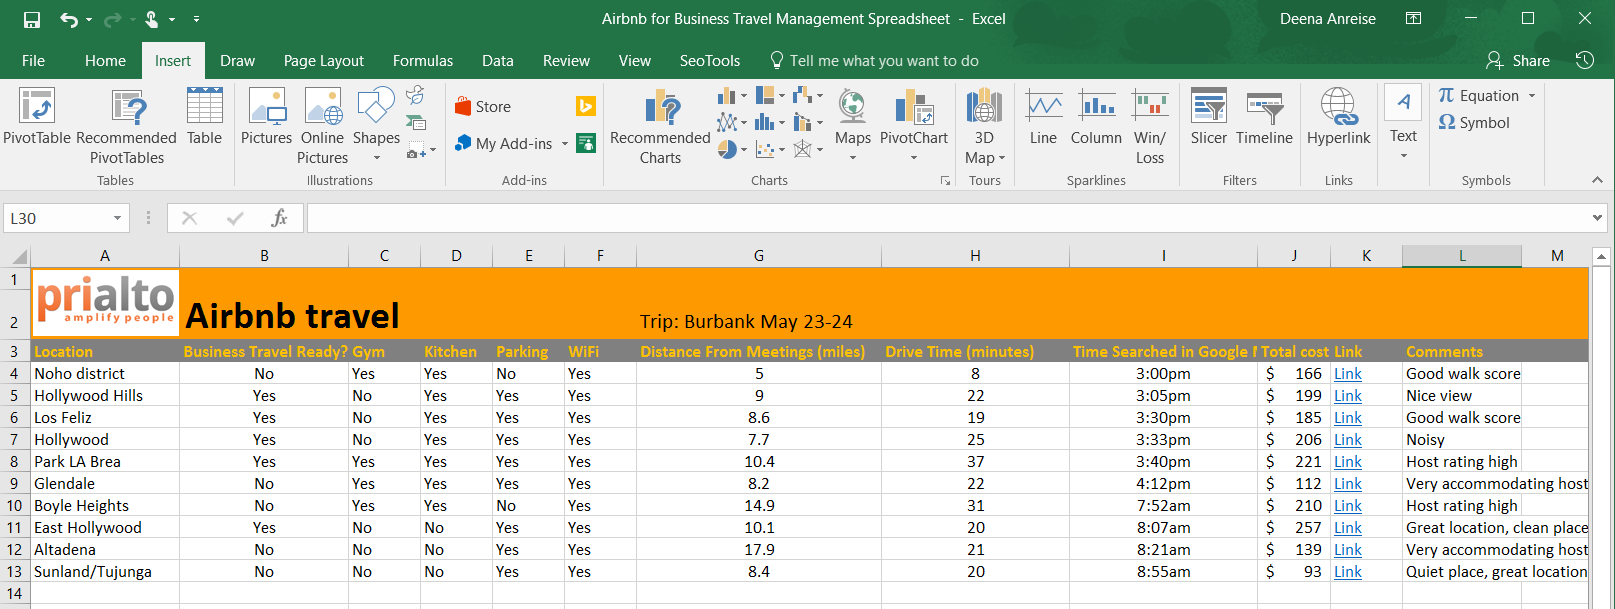 Airbnb Spreadsheet For Overcoming The Pitfalls Of Airbnb For Business Travel Management